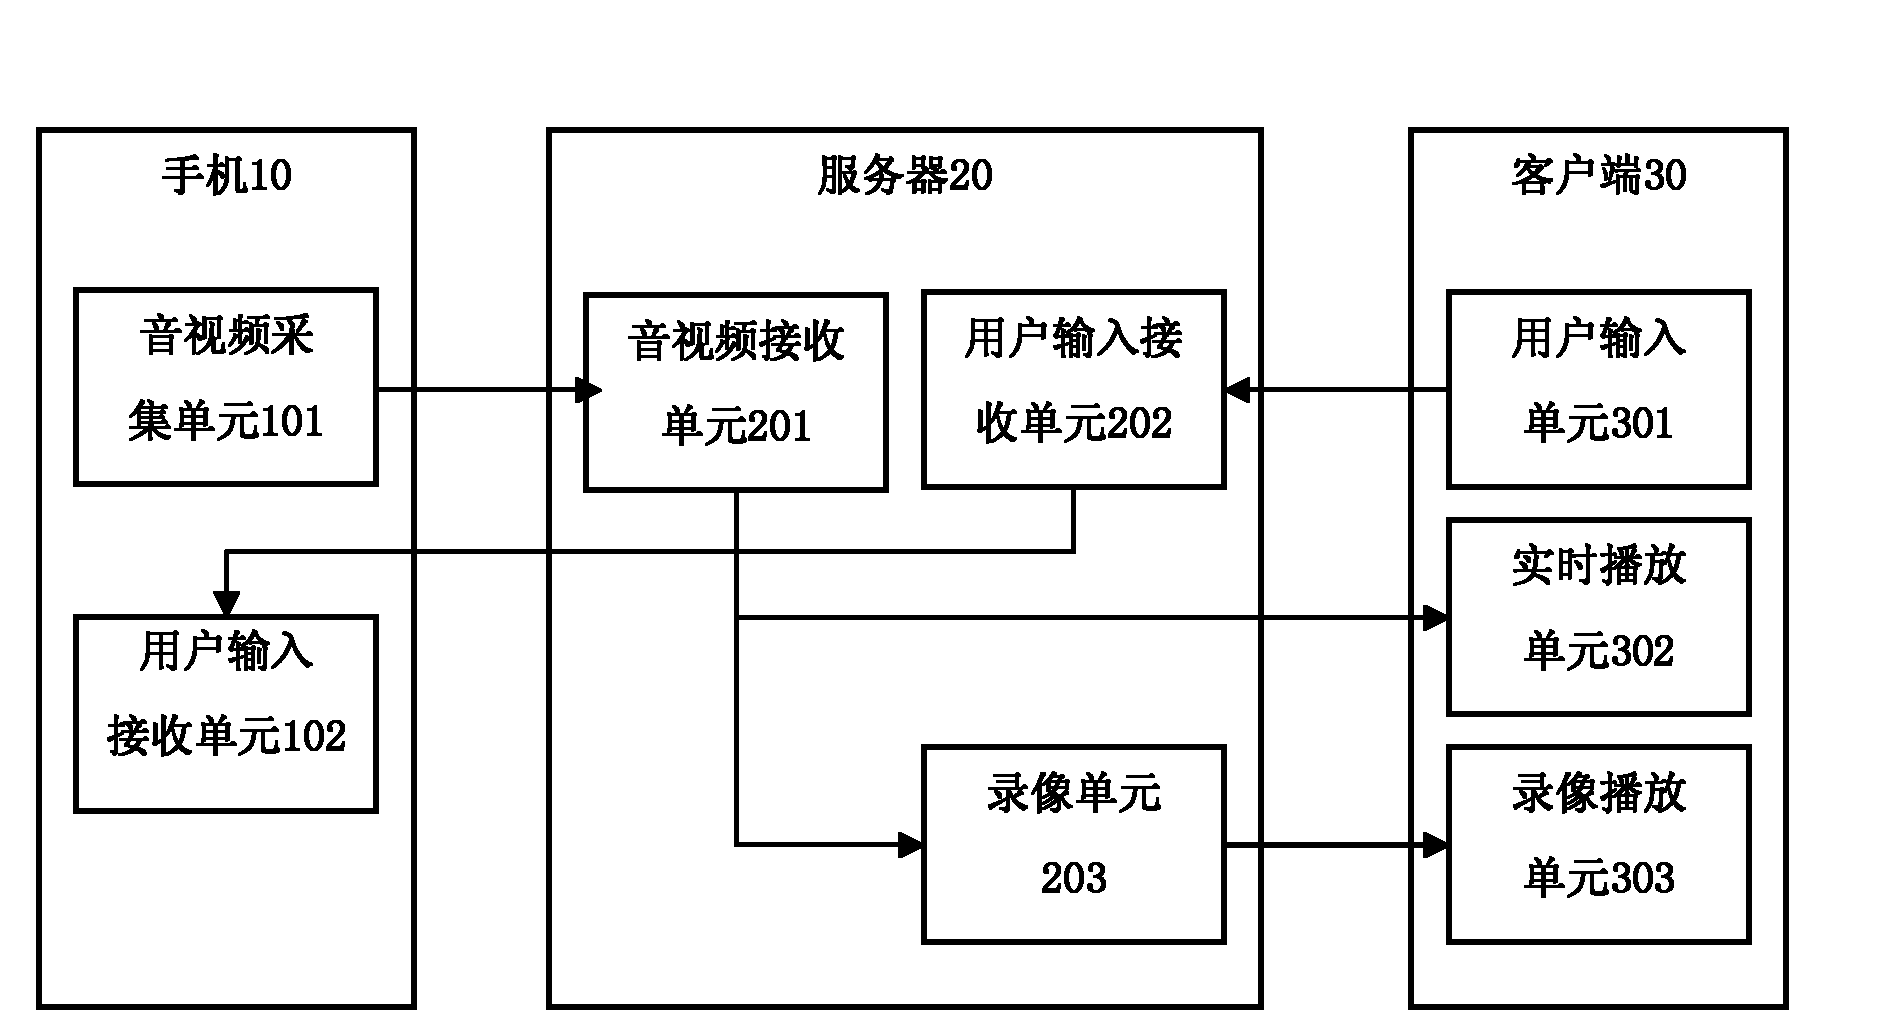 Auxiliary test method, device and system for remote real machine